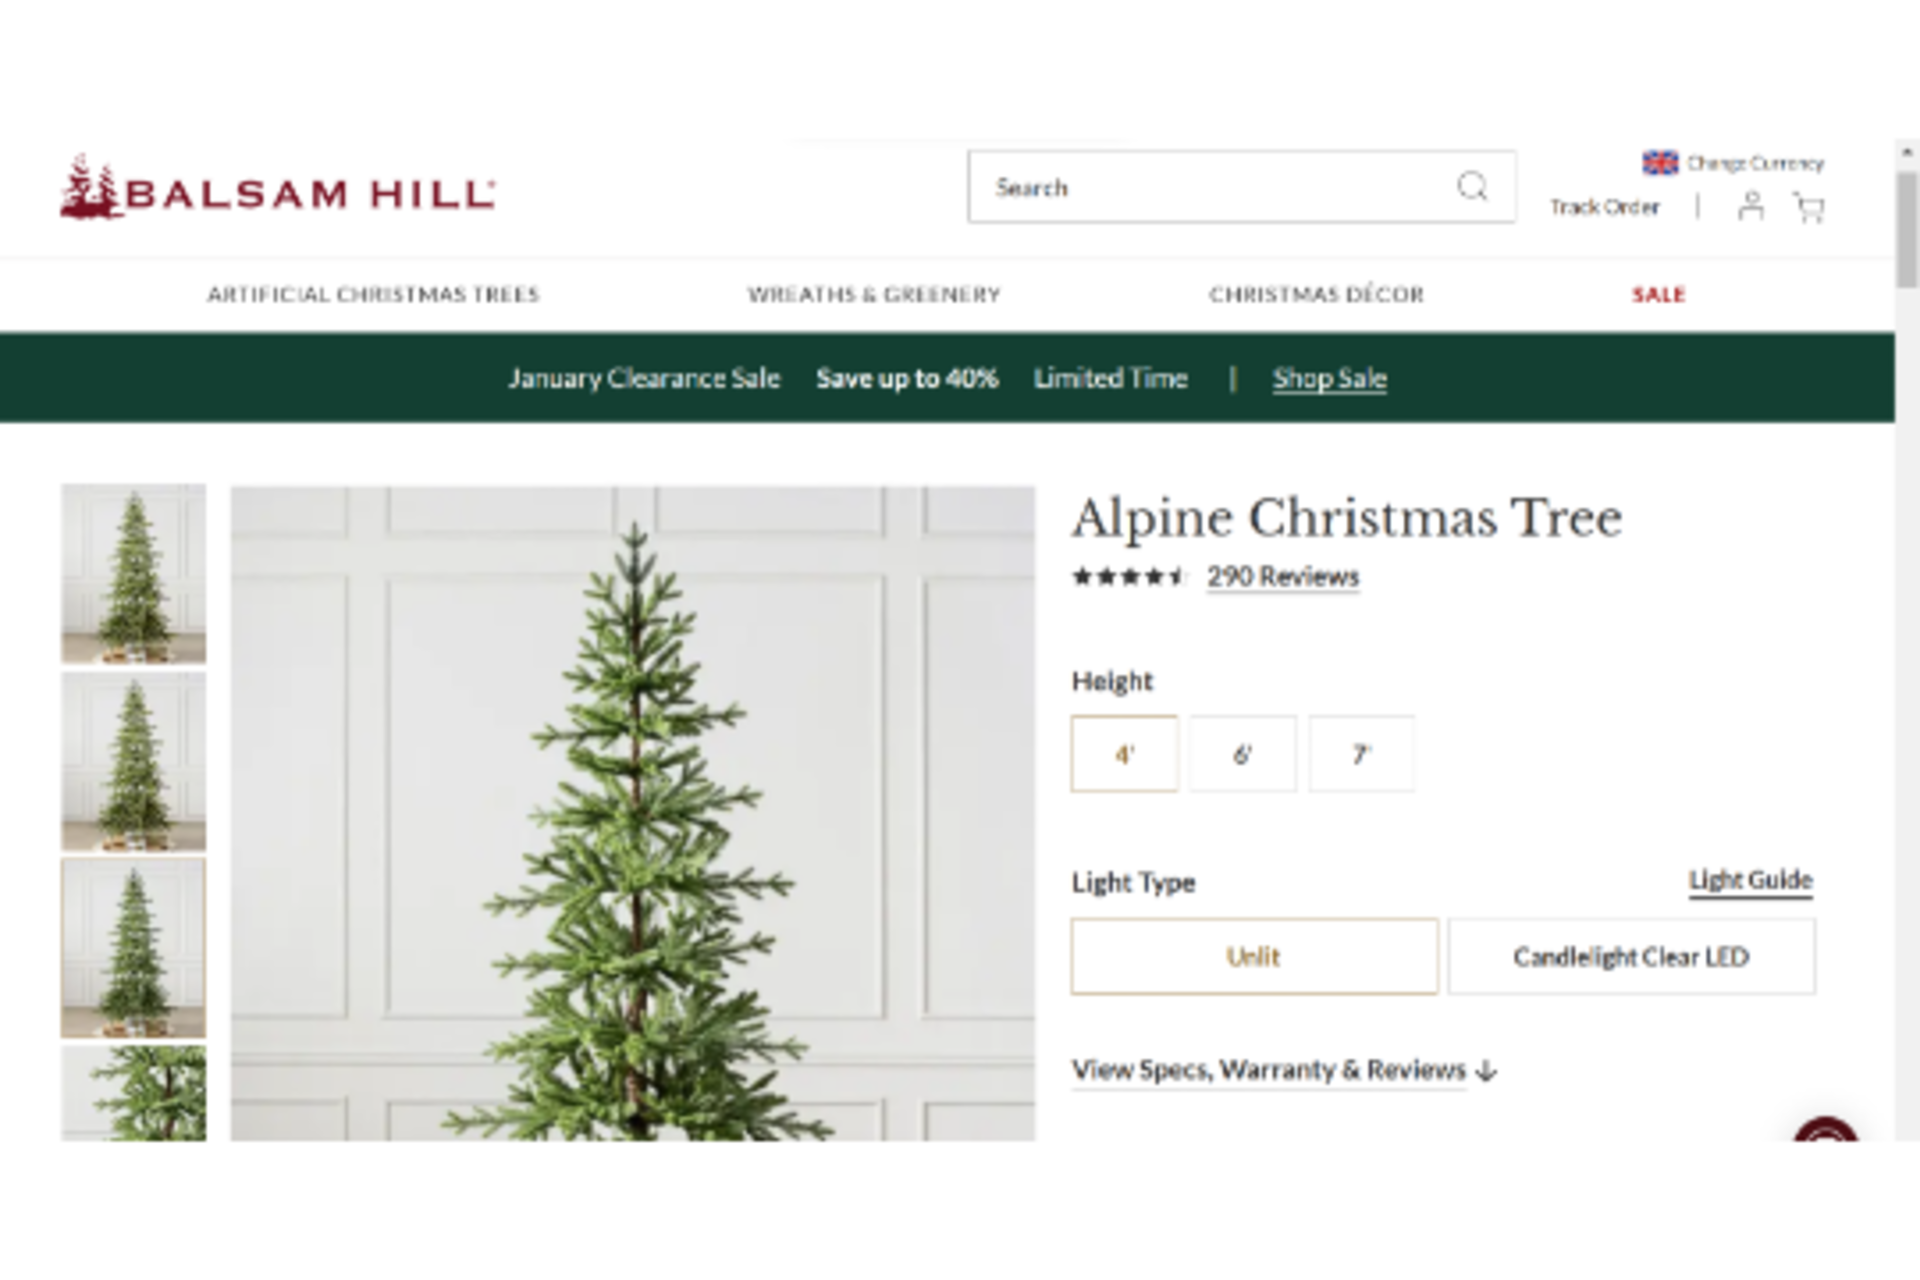 BH (The worlds leading Christmas Trees) Alpine Christmas Tree 4ft Unlit Tree. RRP £329.00. - BI. The - Image 2 of 2